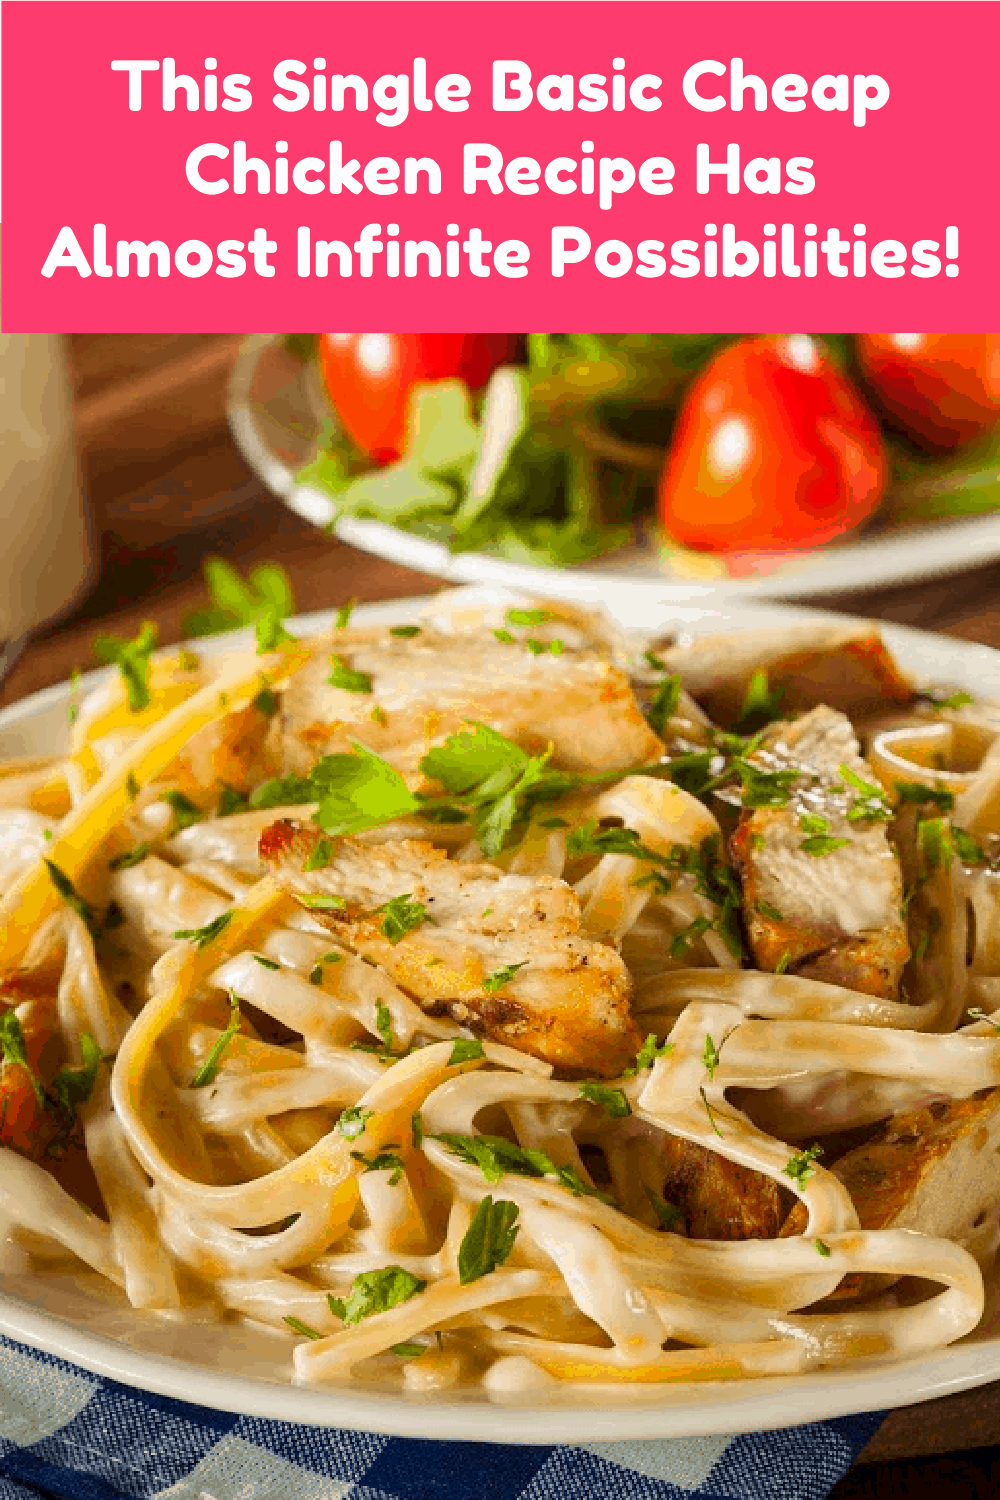 With just this one cheap chicken recipe you can make an almost infinite number of delicious dinners! Trust me, chicken will NEVER be boring again. Check it out!